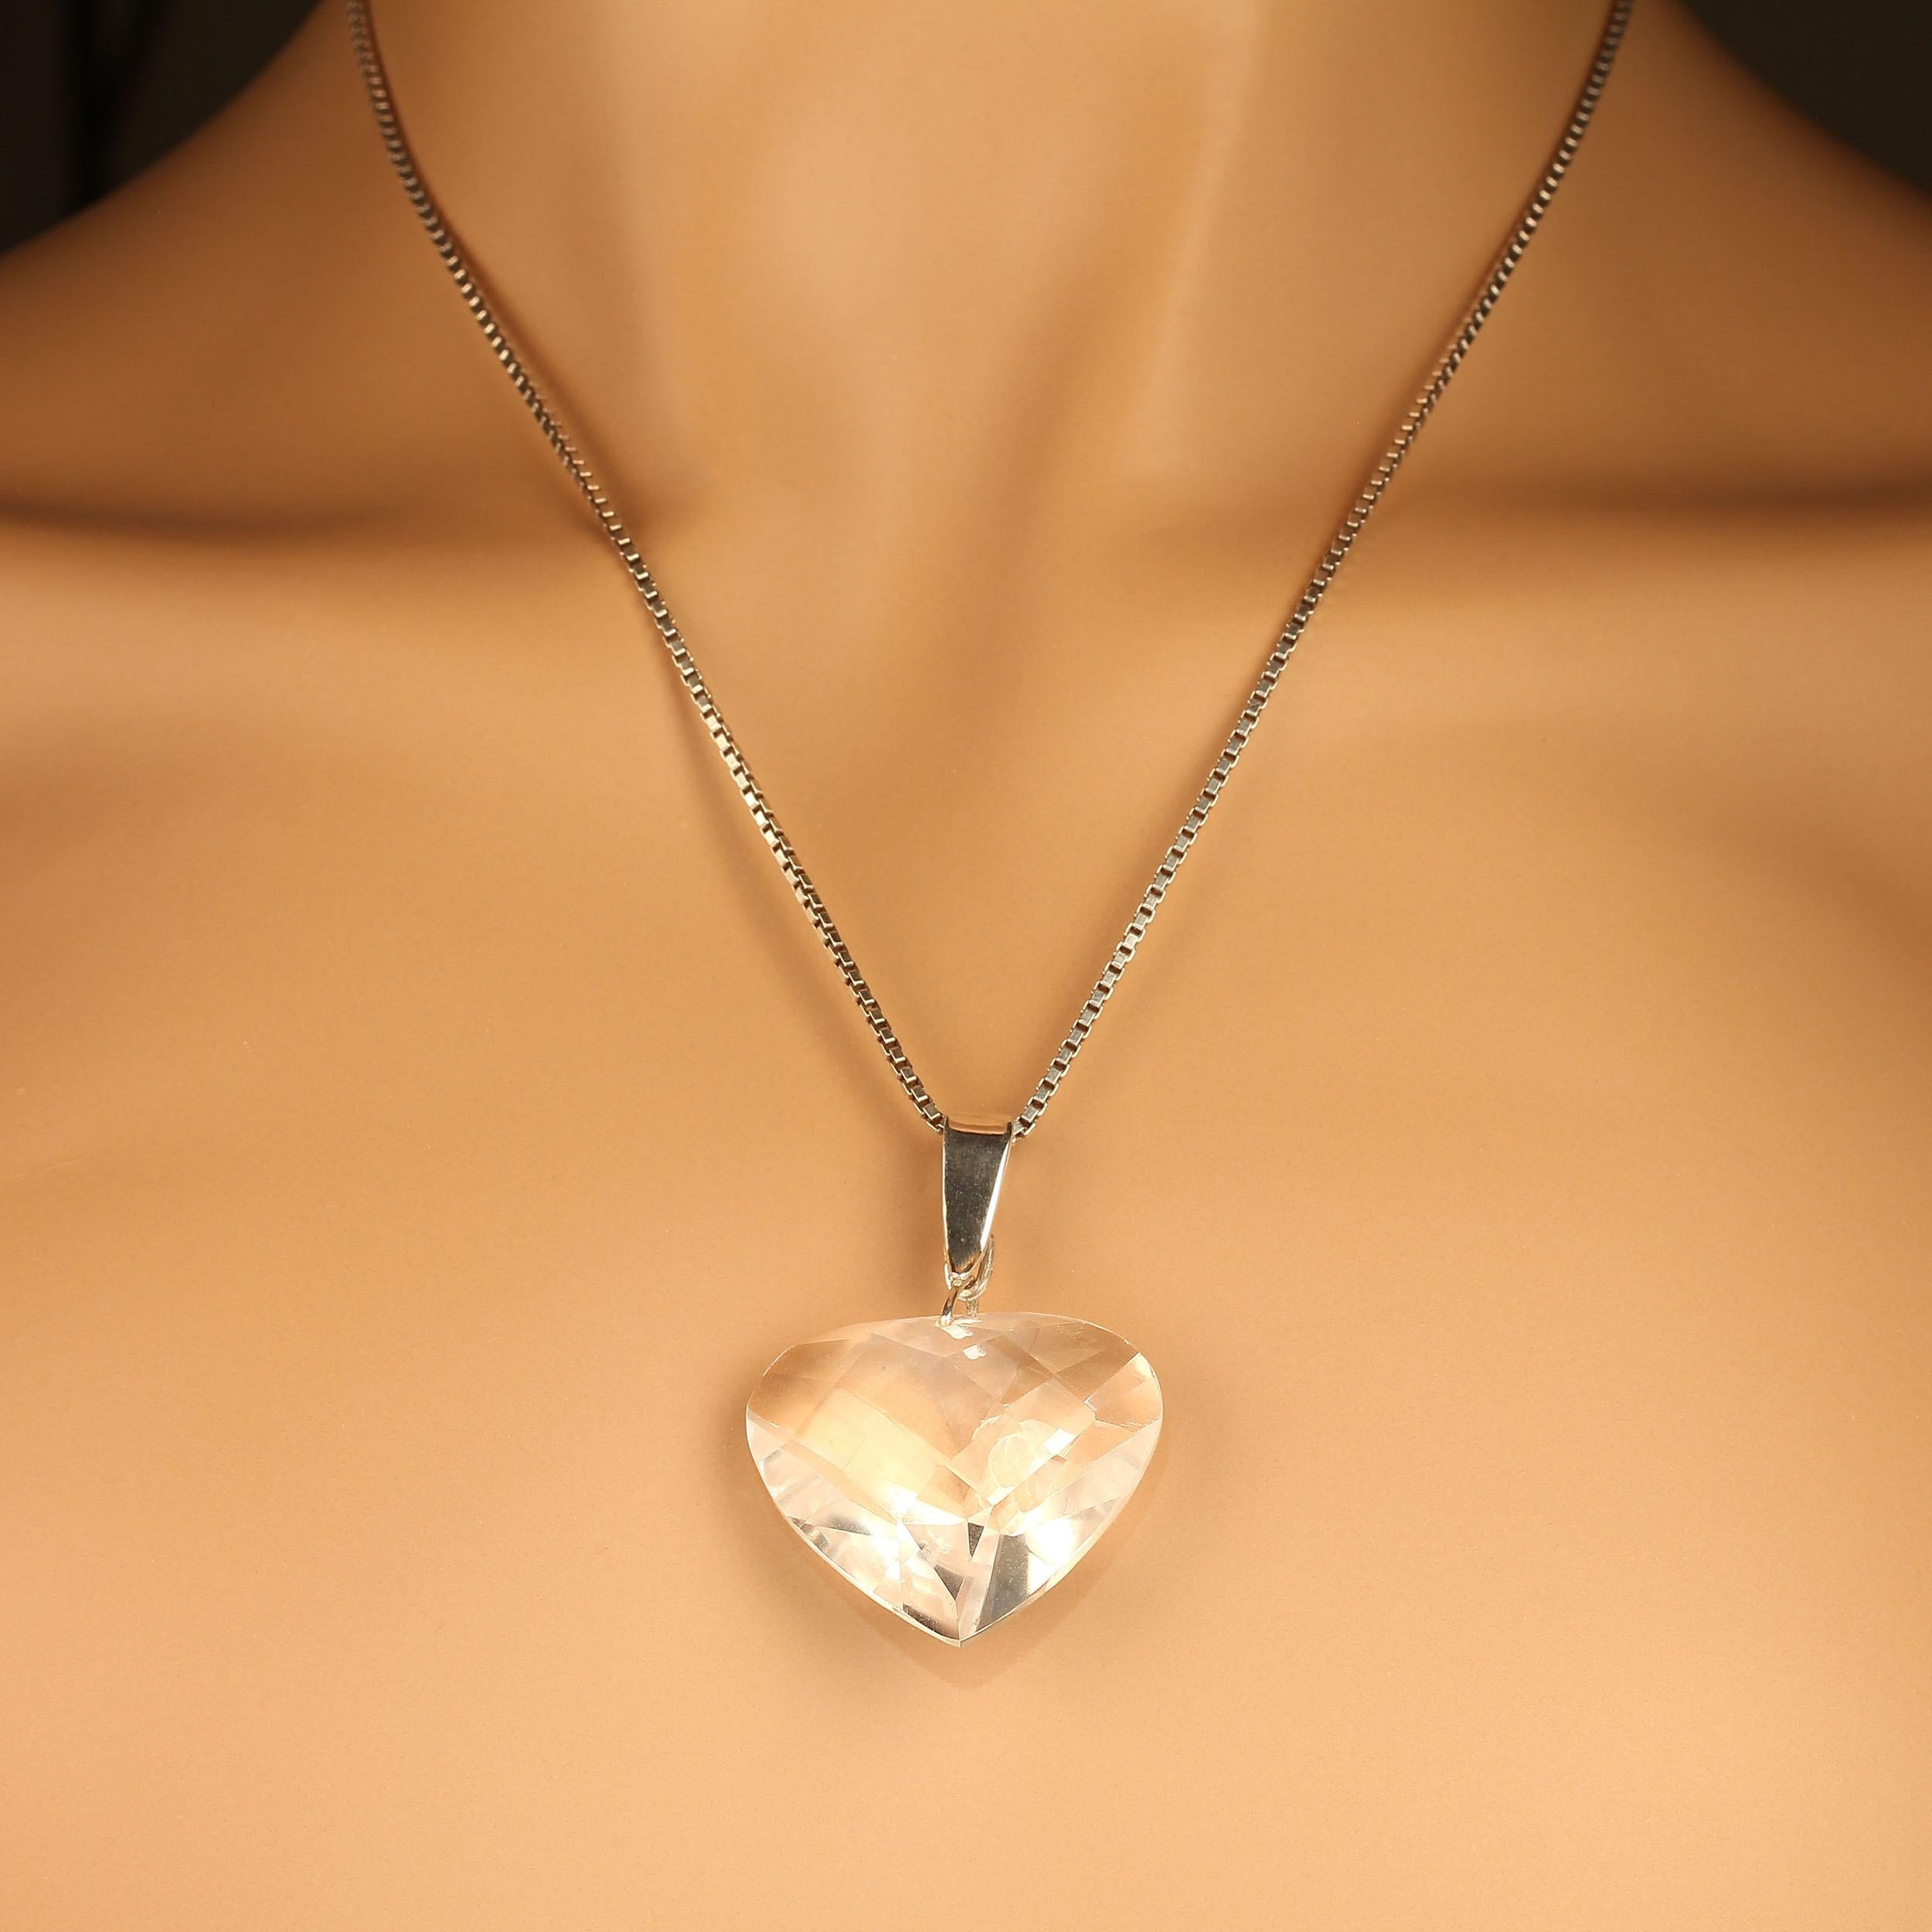 This sparkling fancy cut Quartz Crystal and Sterling Silver heart pendant is just what you need for summer. This gorgeous quartz crystal is supposed to be an amplifying stone which means that whatever you put into it, it will return many times.